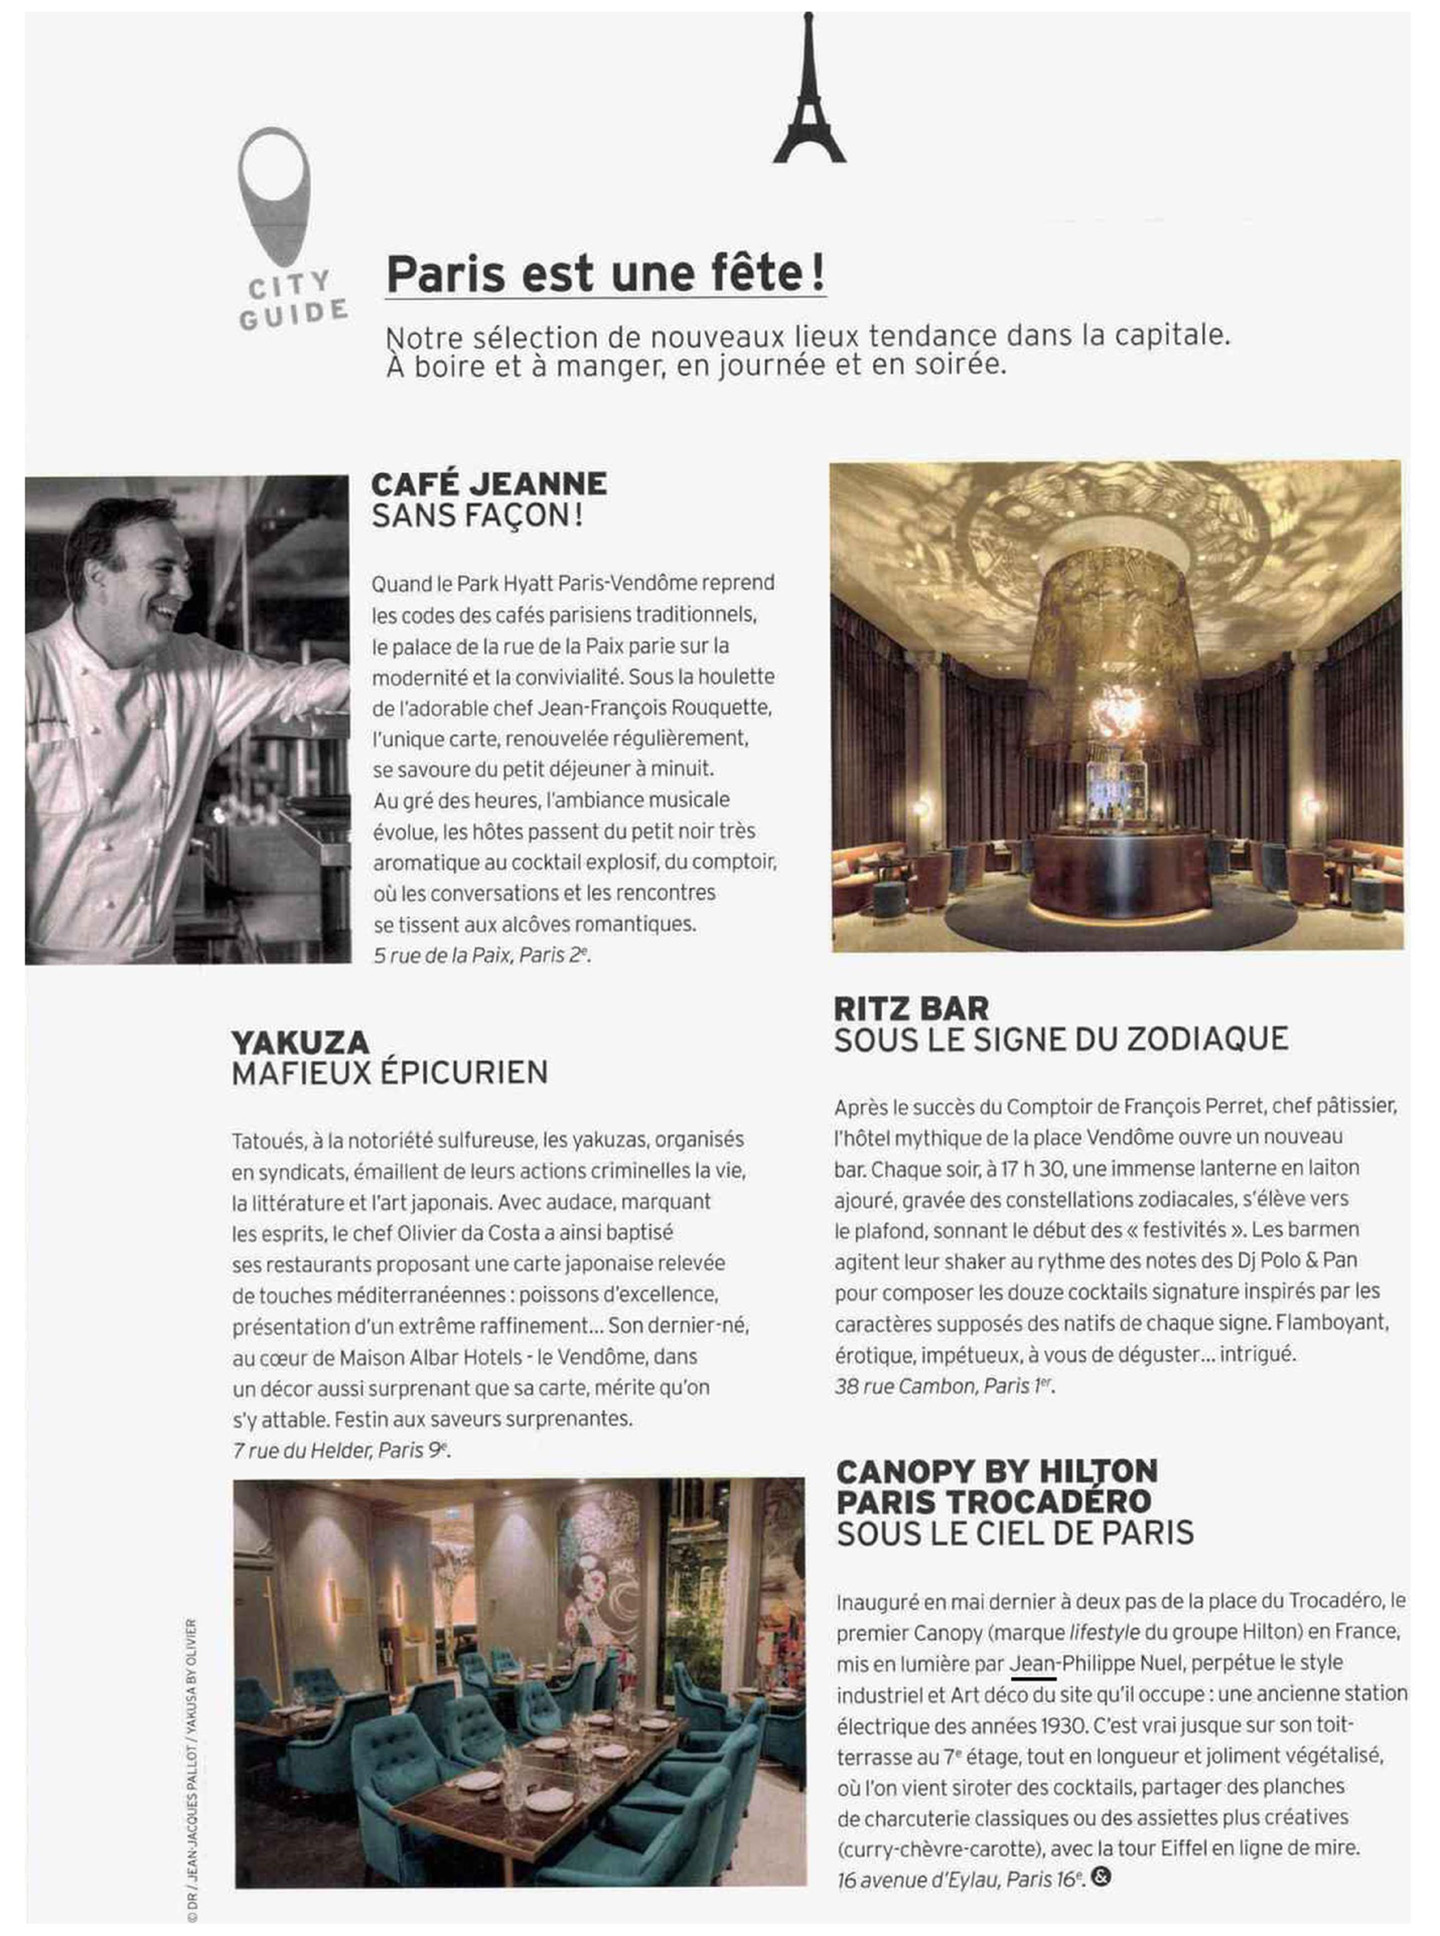 Article on the Canopy by Hilton Paris Trocadero designed by jean-Philippe Nuel studio in HOTEL & LODGE magazine, new lifestyle hotel, luxury interior design, paris center, french luxury hotel